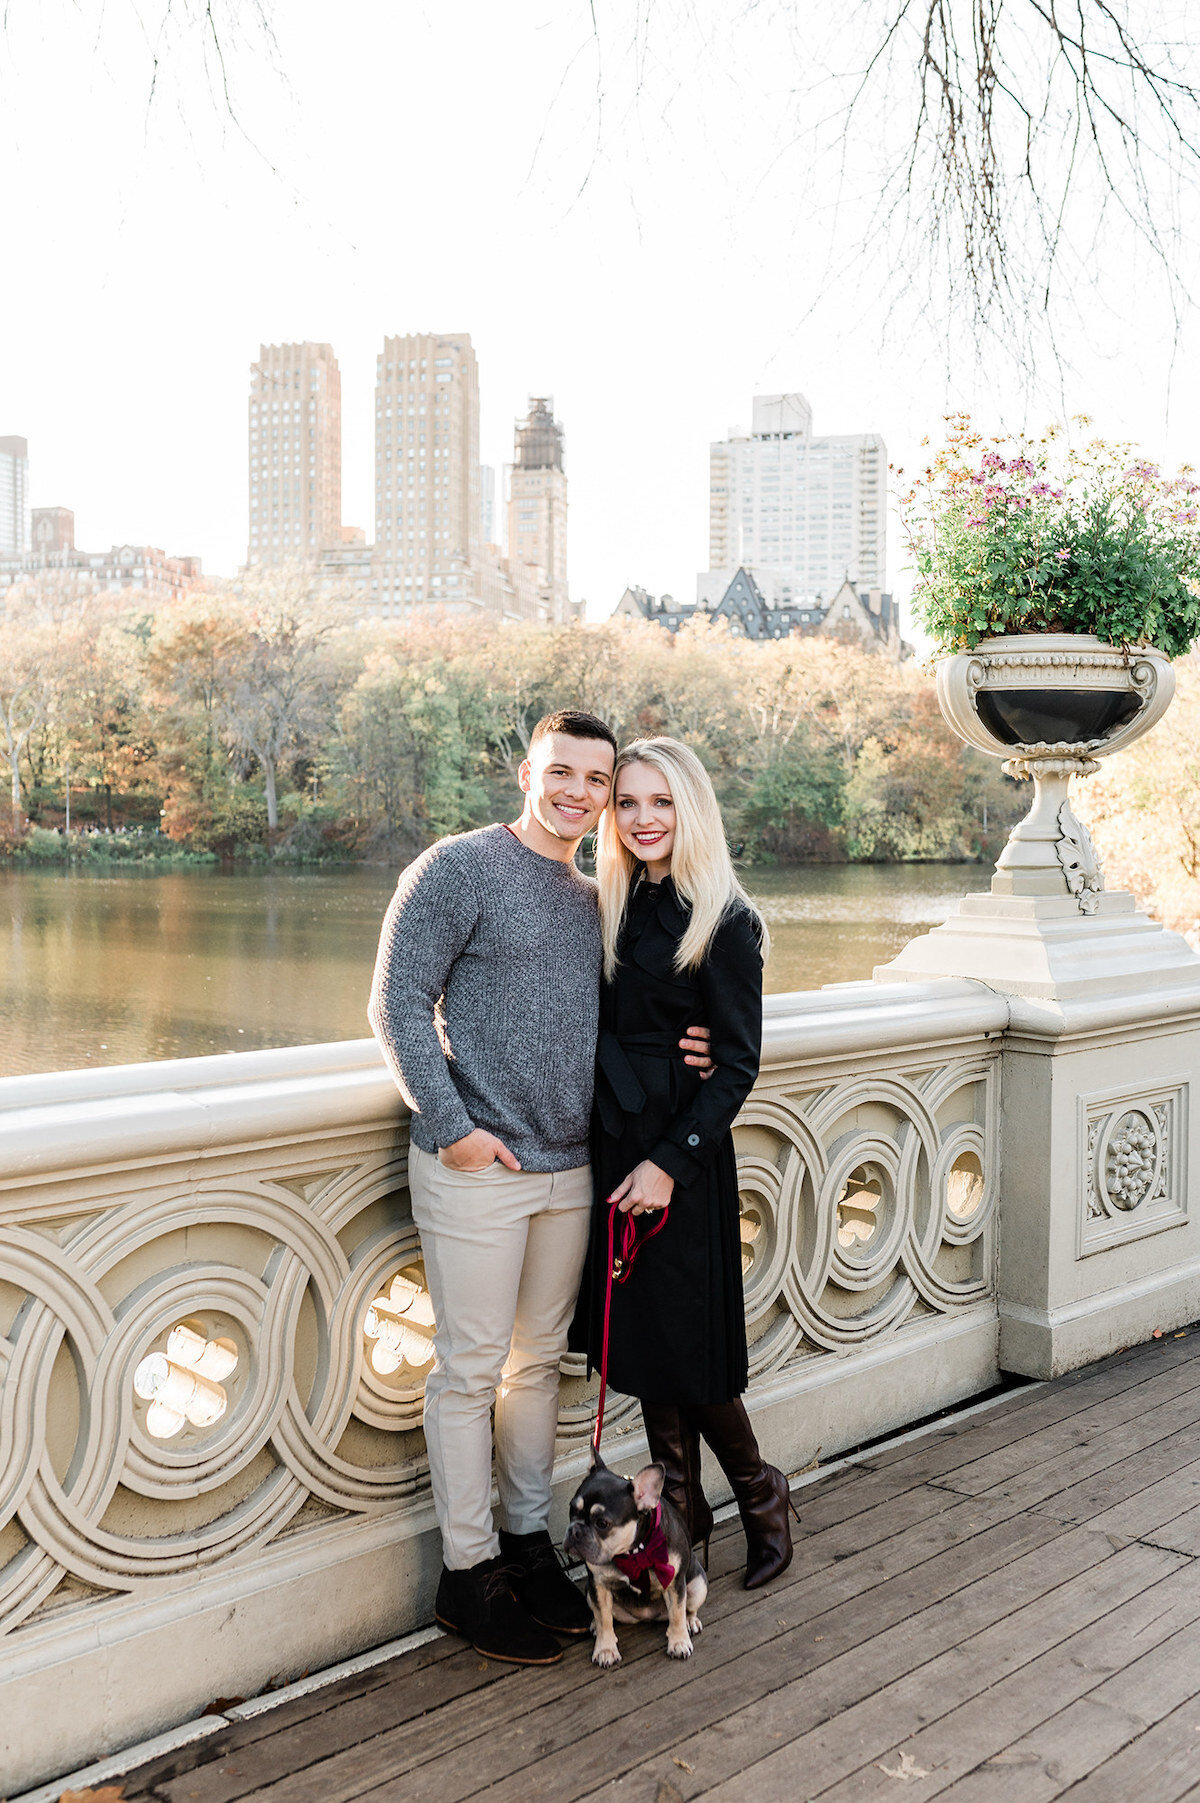 Unveil your love story with the elegance of fine art photography in our luxury engagement sessions. Amidst New York's iconic scenery, we capture your authentic moments with artistic flair.